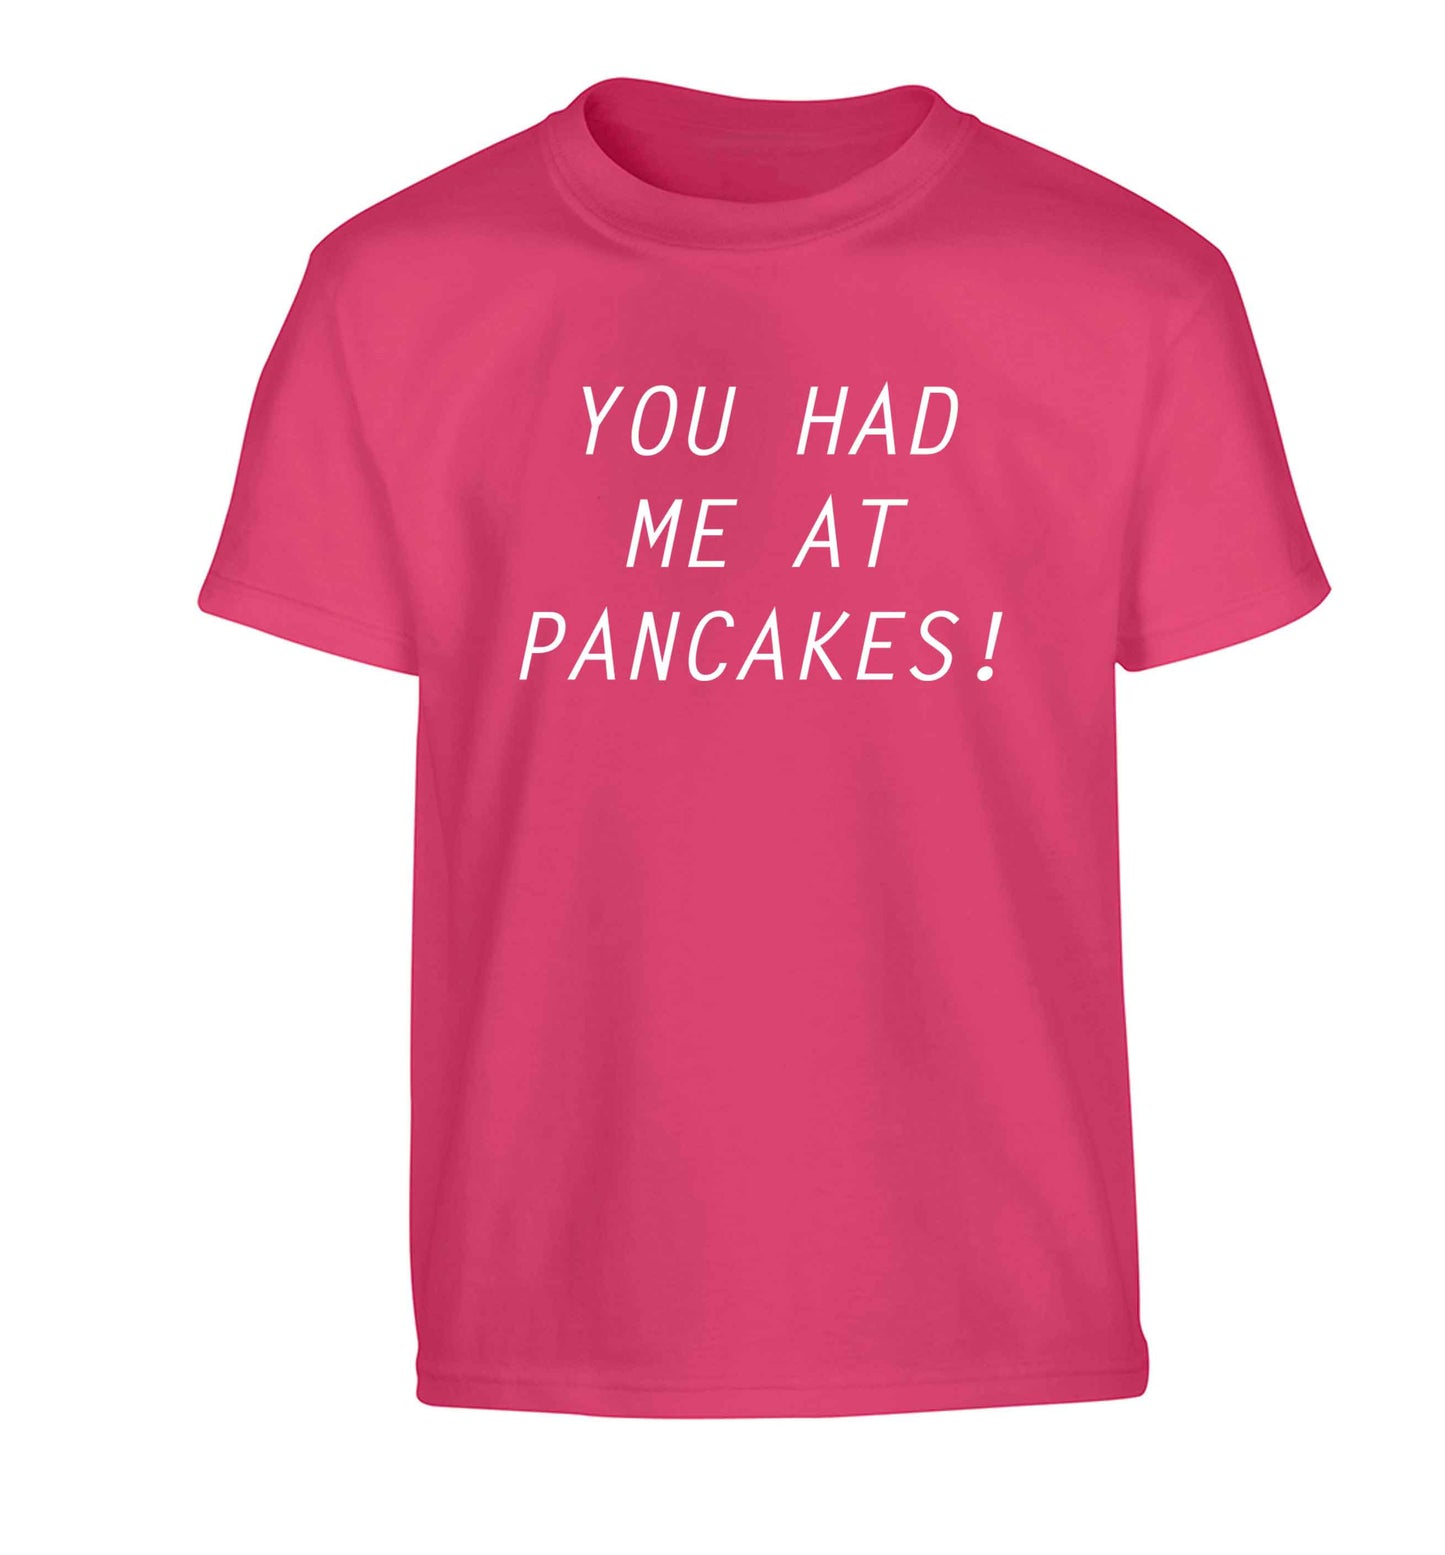 You had me at pancakes Children's pink Tshirt 12-13 Years